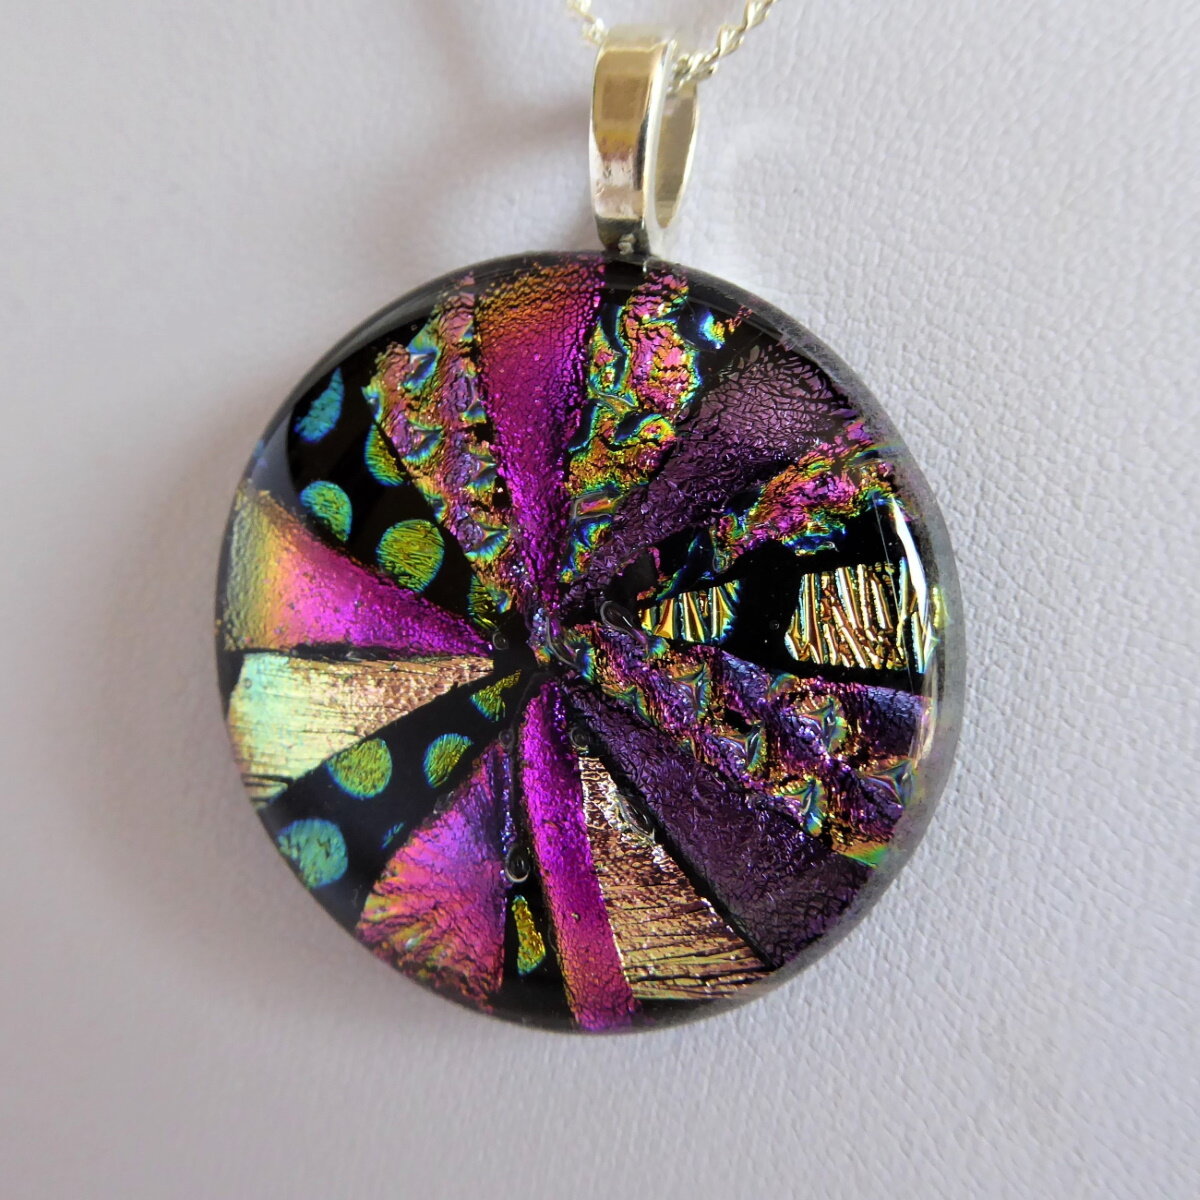 Fused Glass Dichroic Glass in Pinwheel Design - Art in Glass